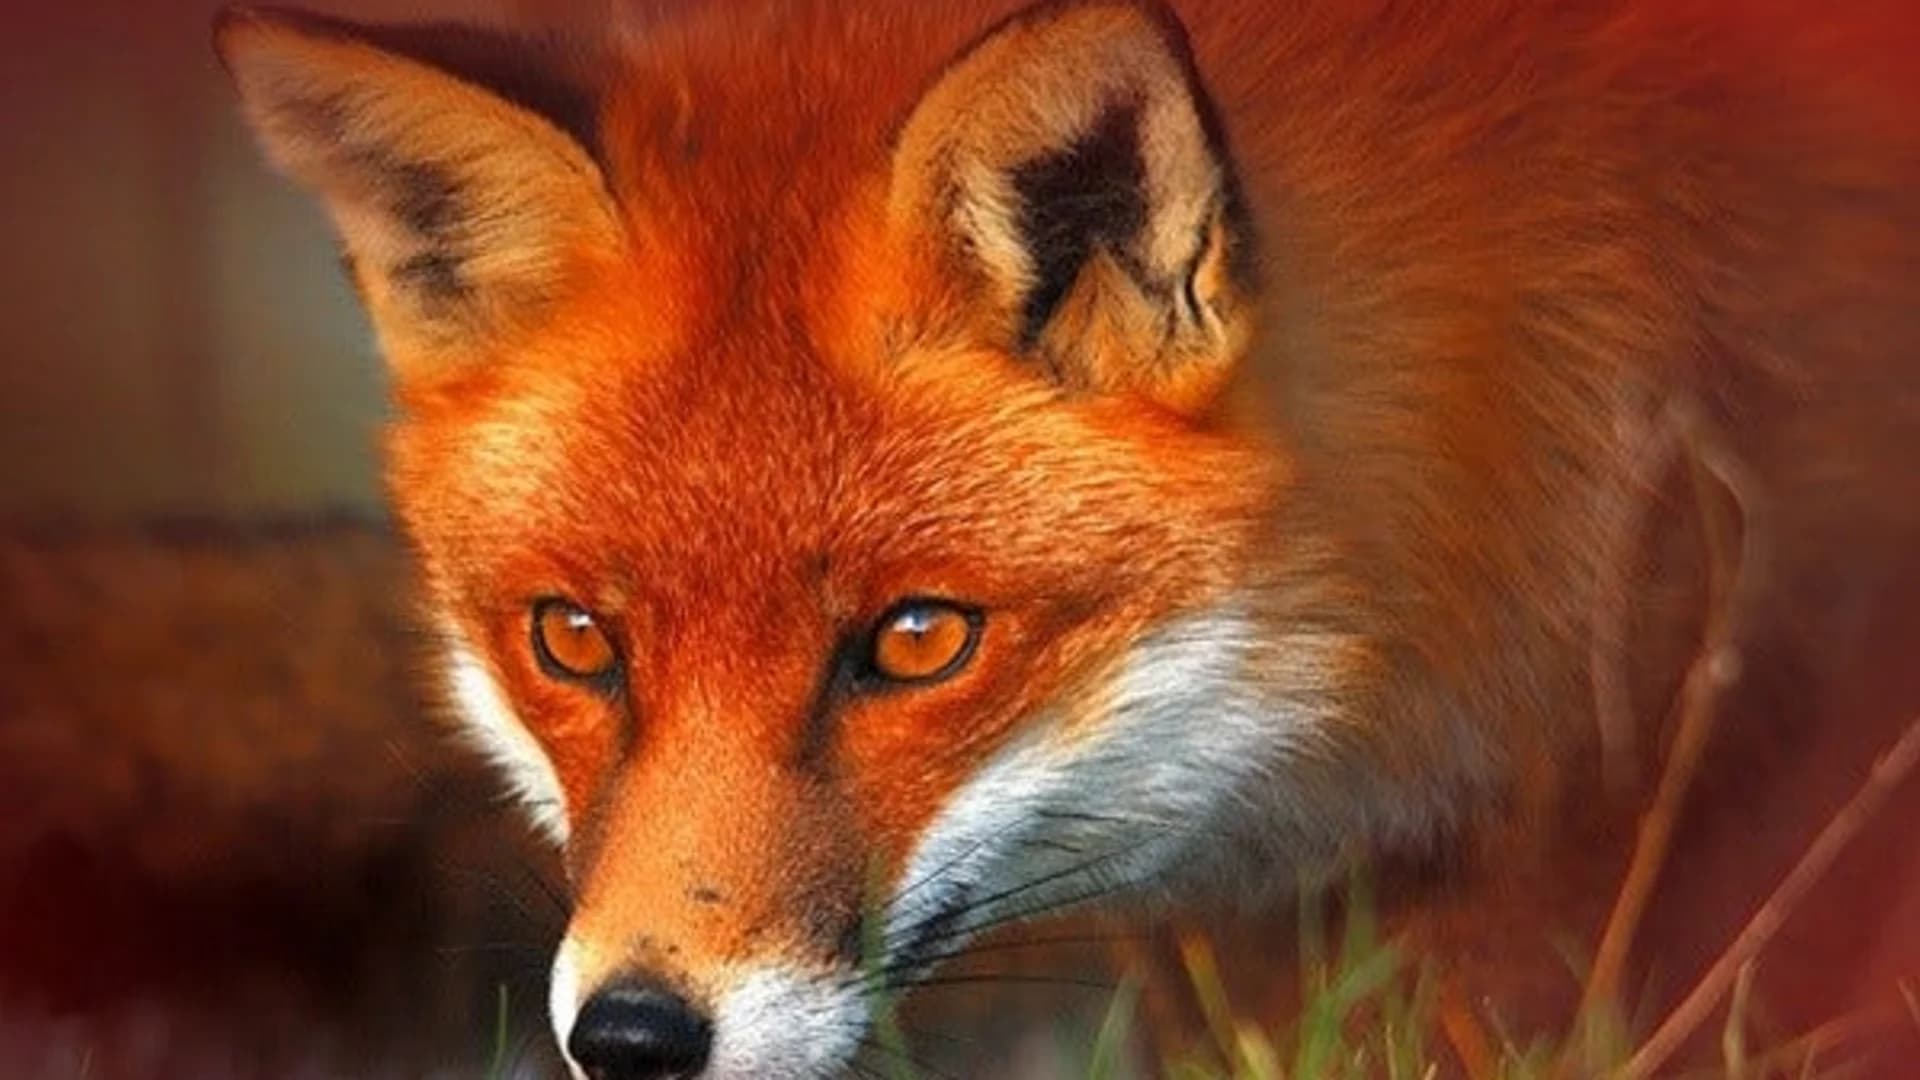 Officials: Fox tests positive for rabies in New Jersey town